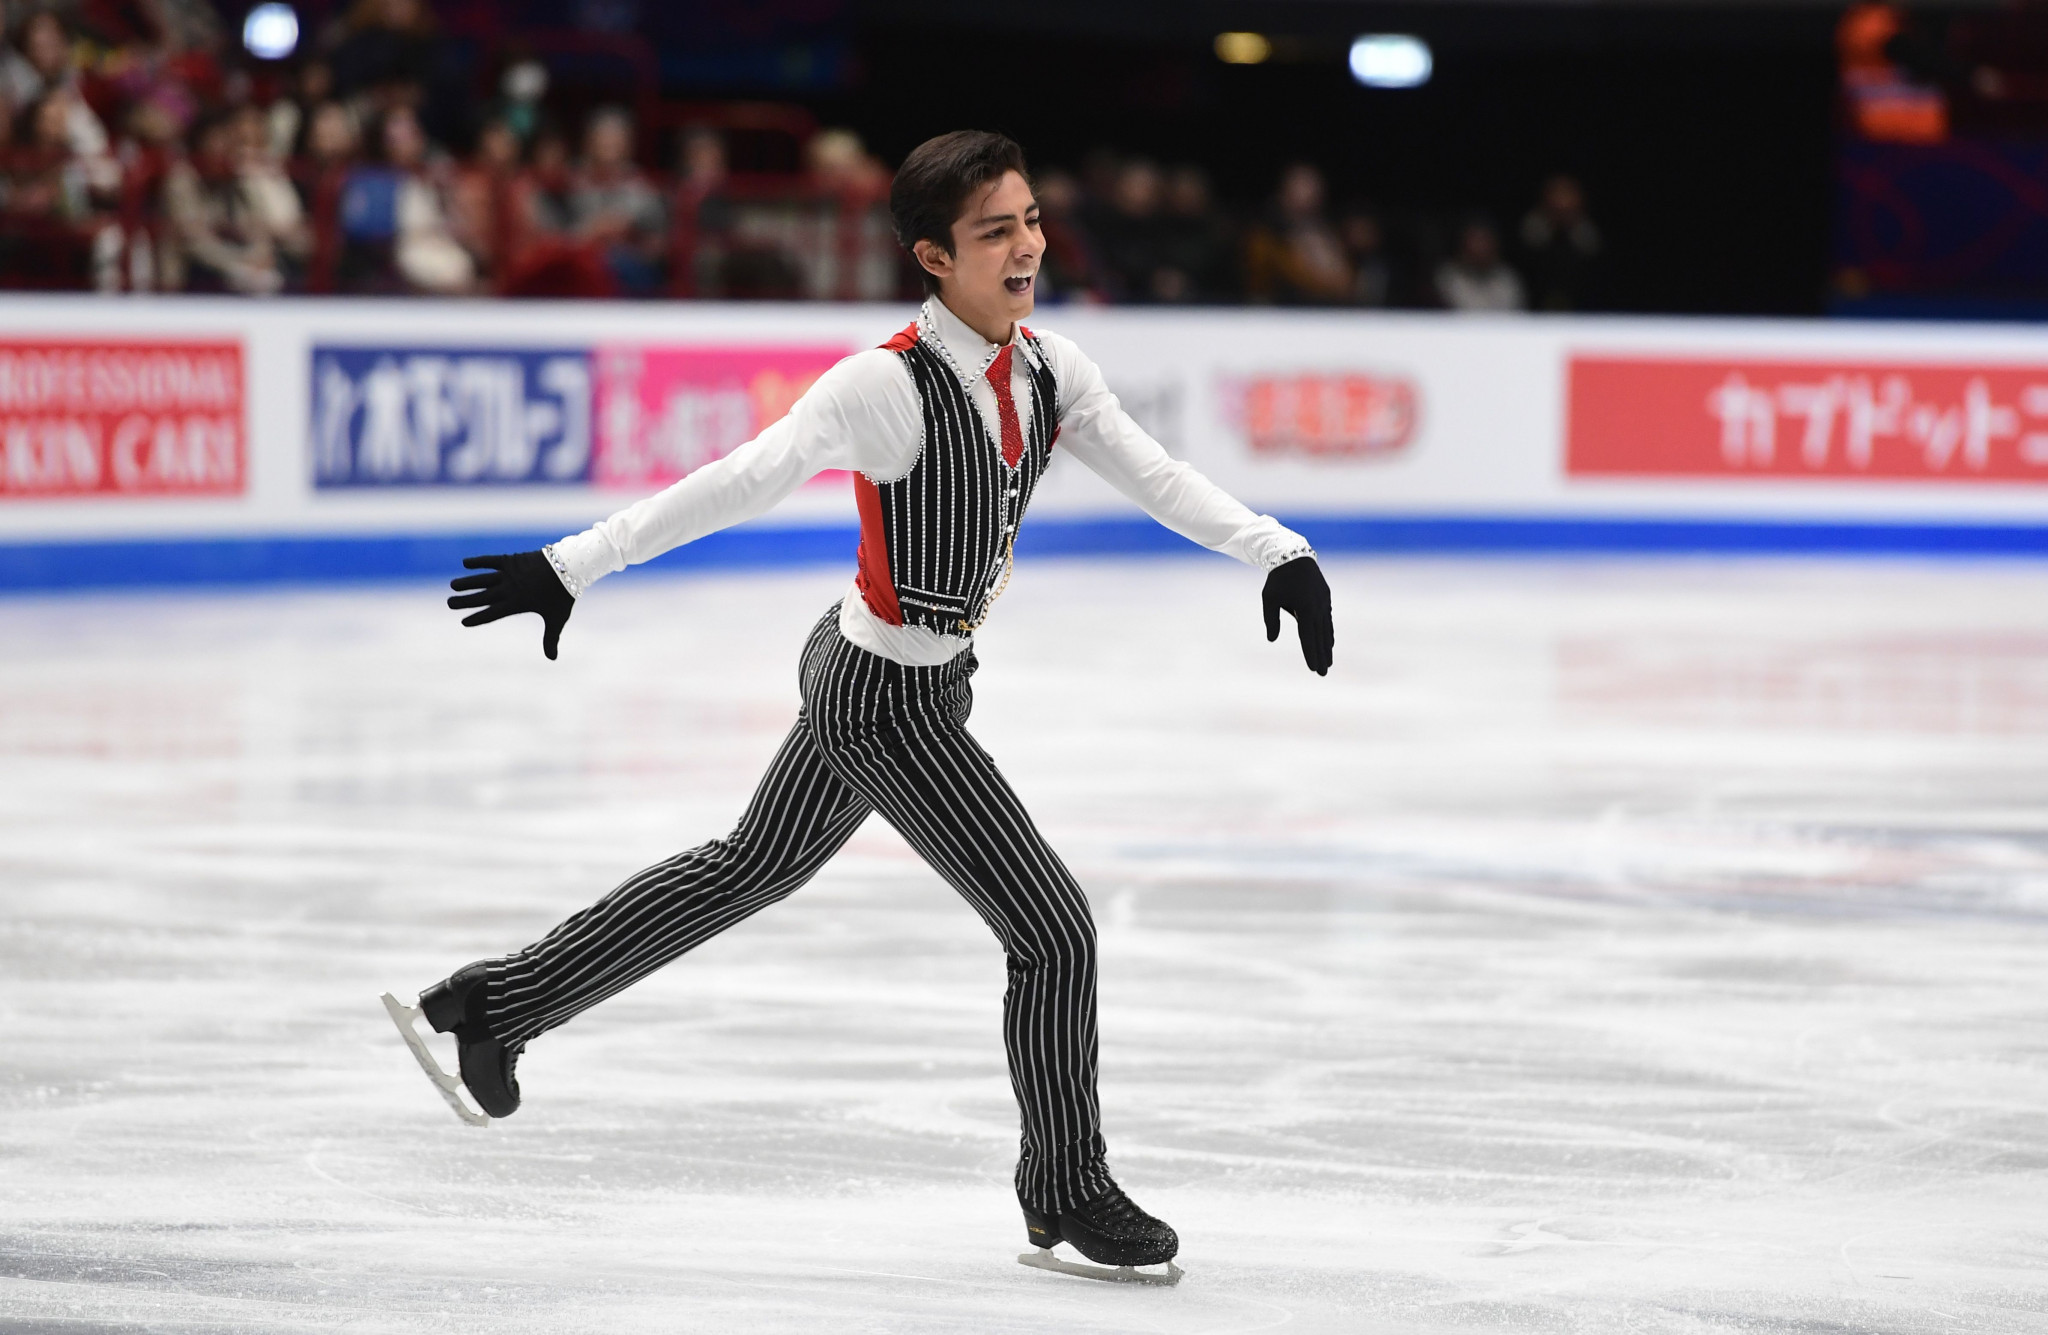 Donovan Carrillo is attempting to become Mexico's first Olympic figure skater for 30 years ©Getty Images